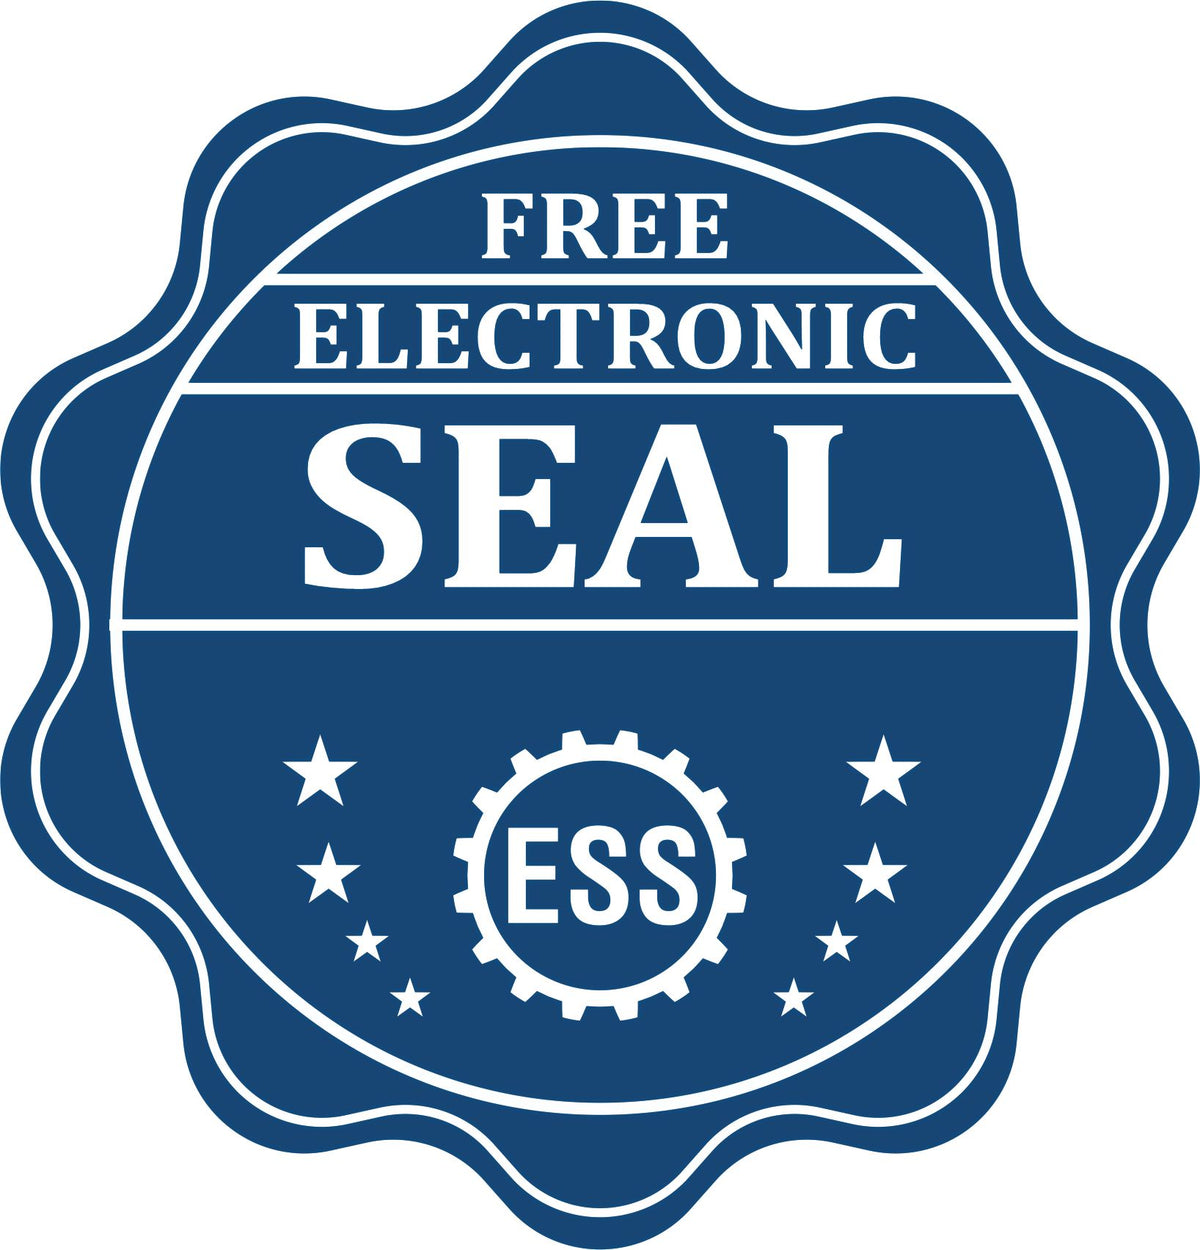 A badge showing a free electronic seal for the Kansas Professional Engineer Seal Stamp with stars and the ESS gear on the emblem.